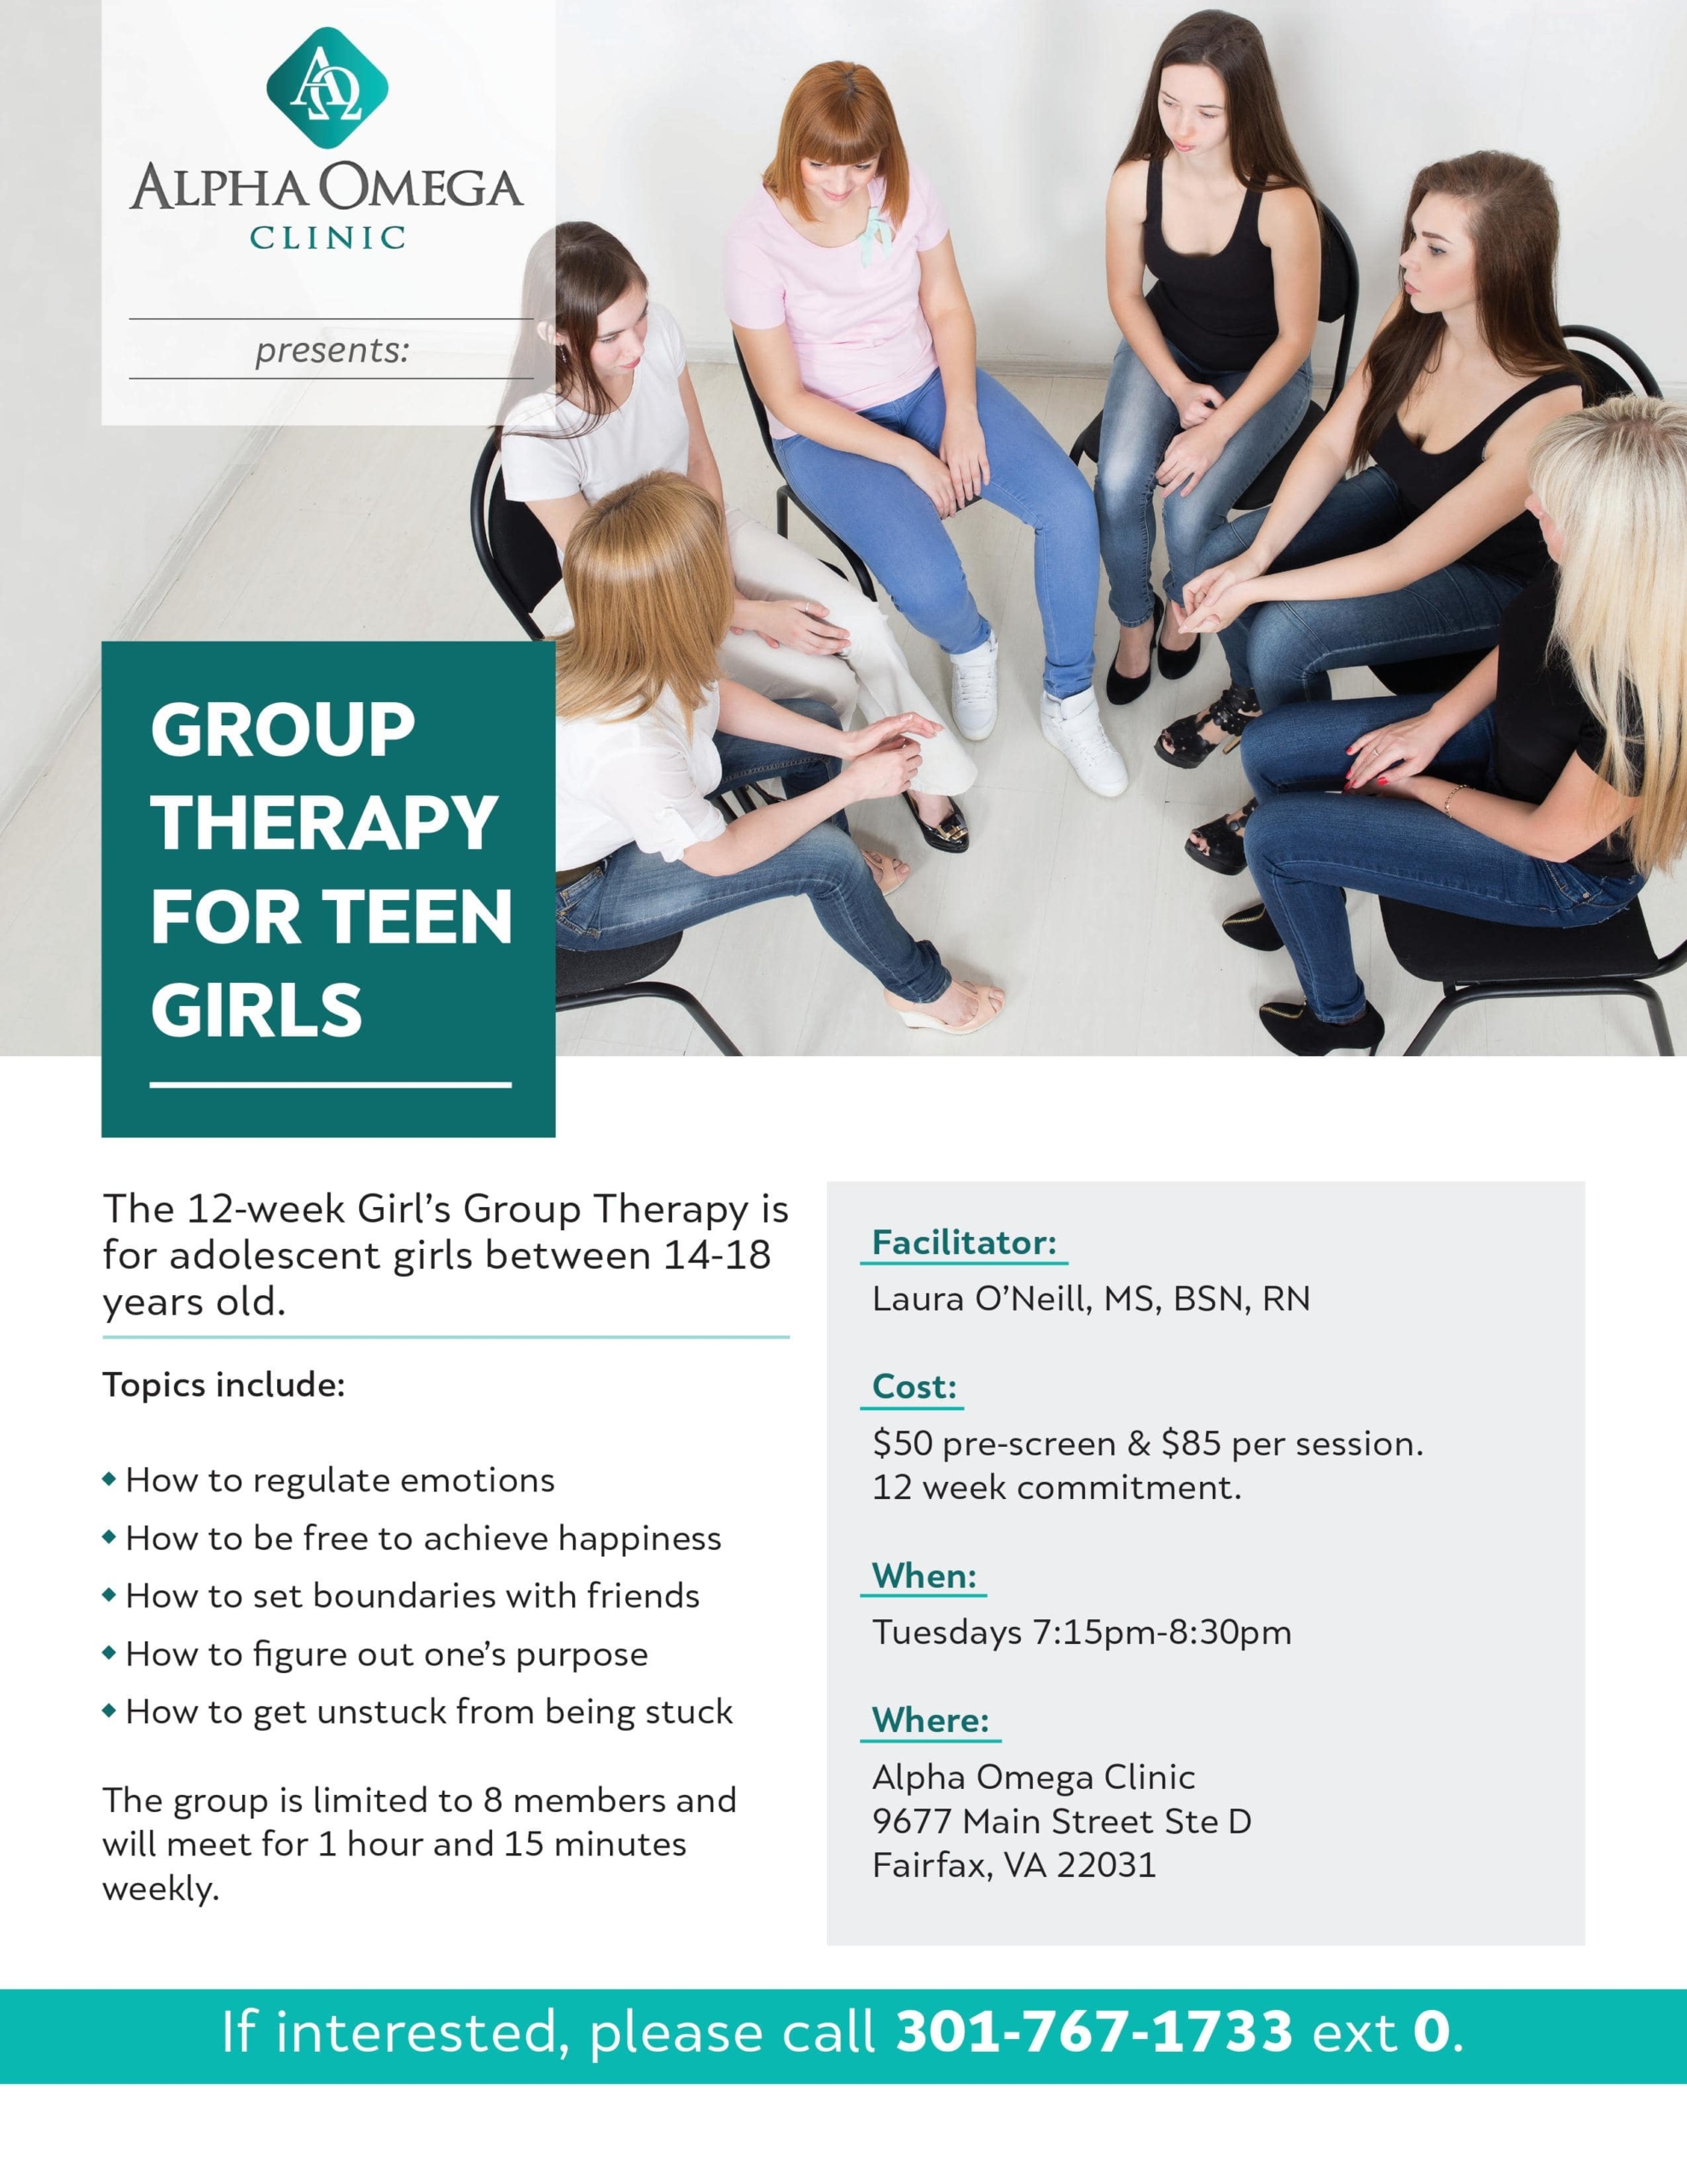 Teen Girls Group Therapy - Alpha Omega Clinic